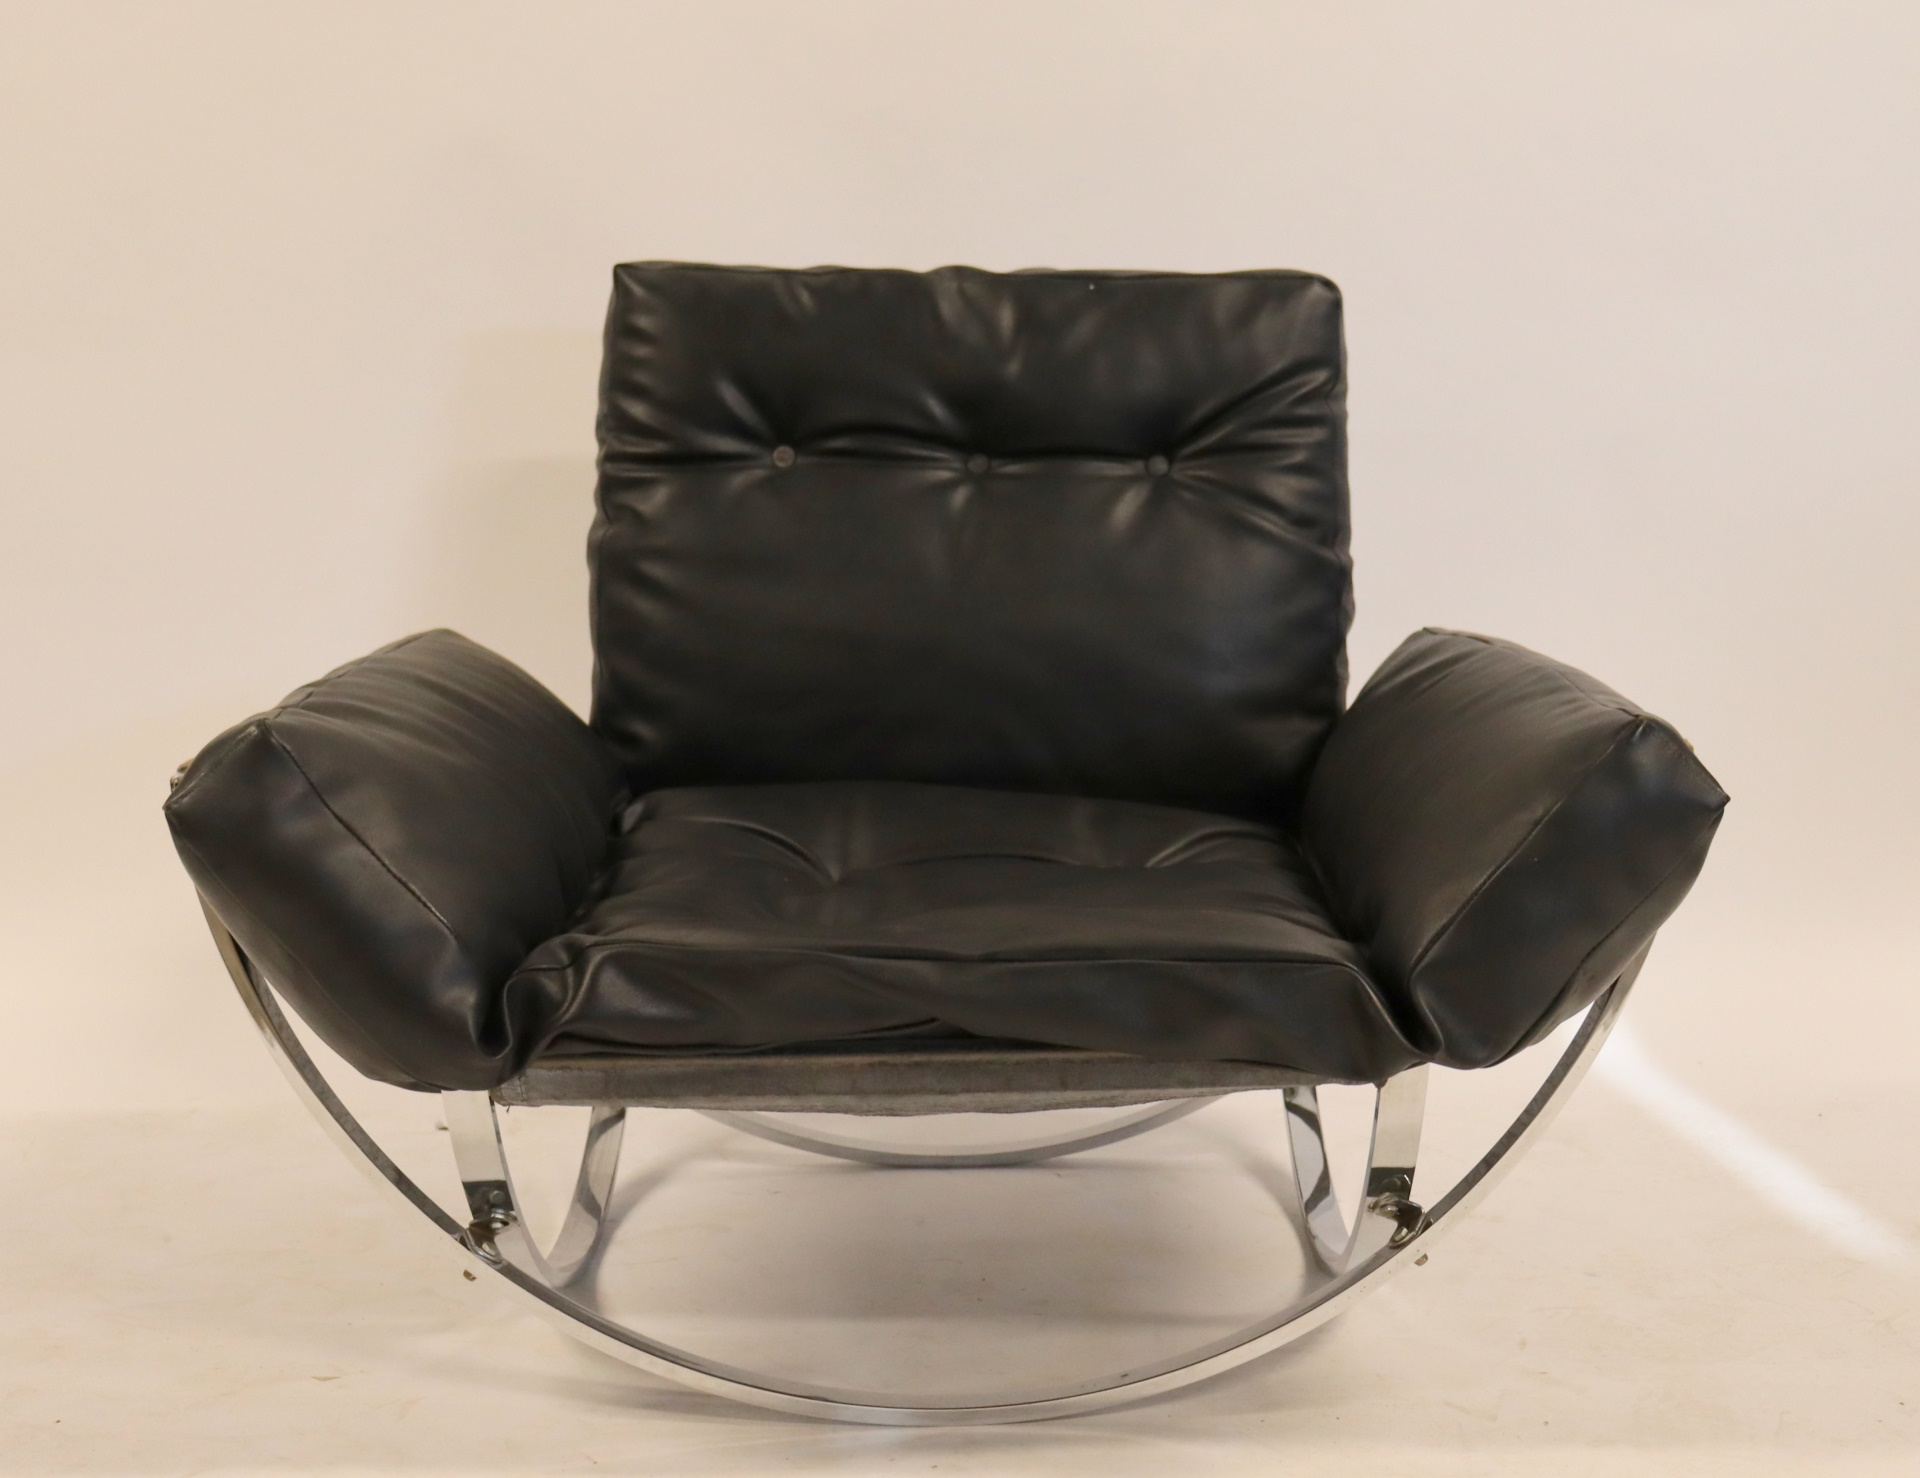 MIDCENTURY CHROME SLING CHAIR WITH 3b8236